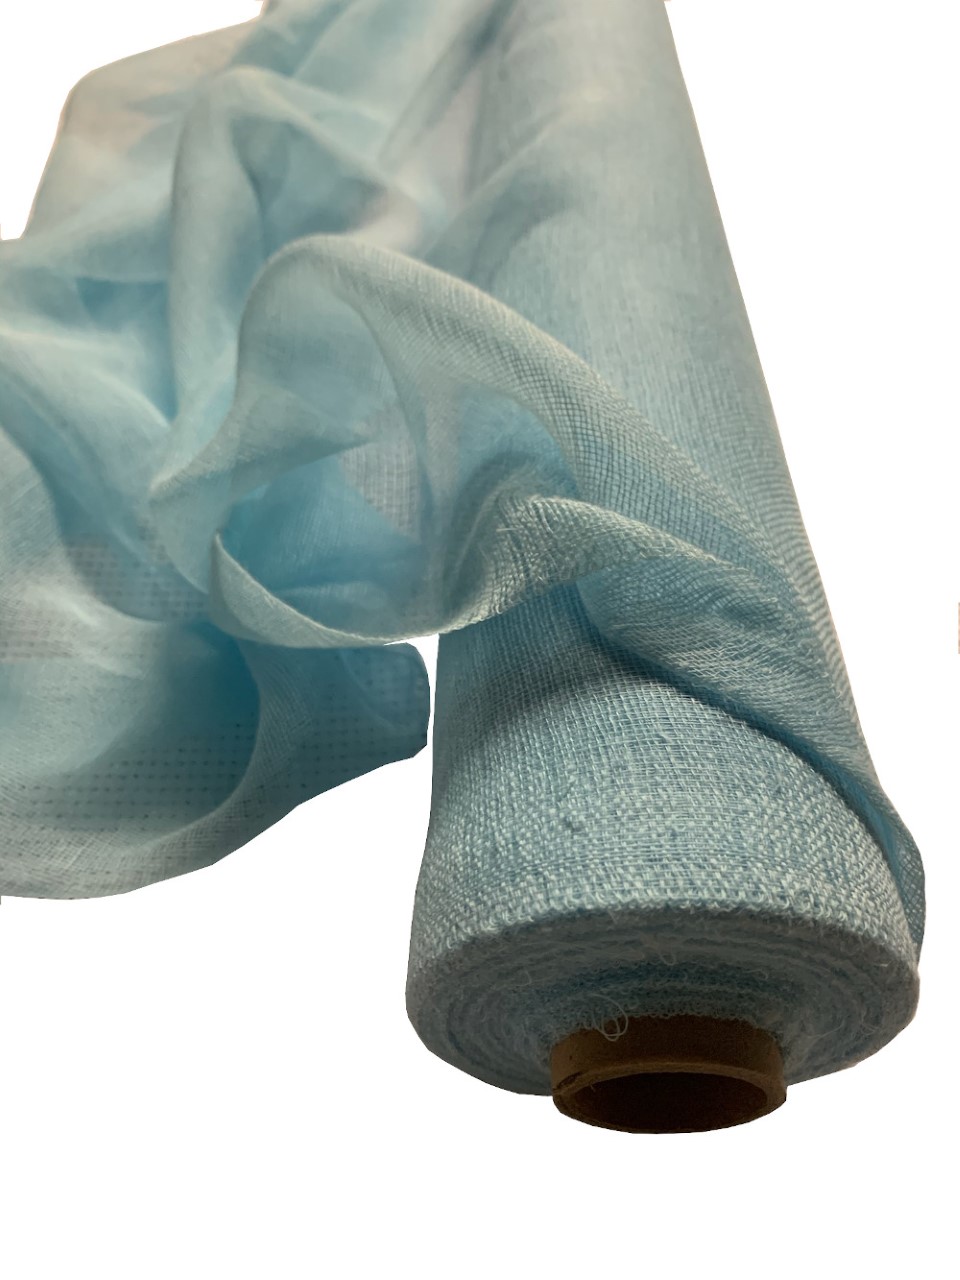 Light Blue Cheesecloth 36" x 100 Foot Roll - 100% Cotton